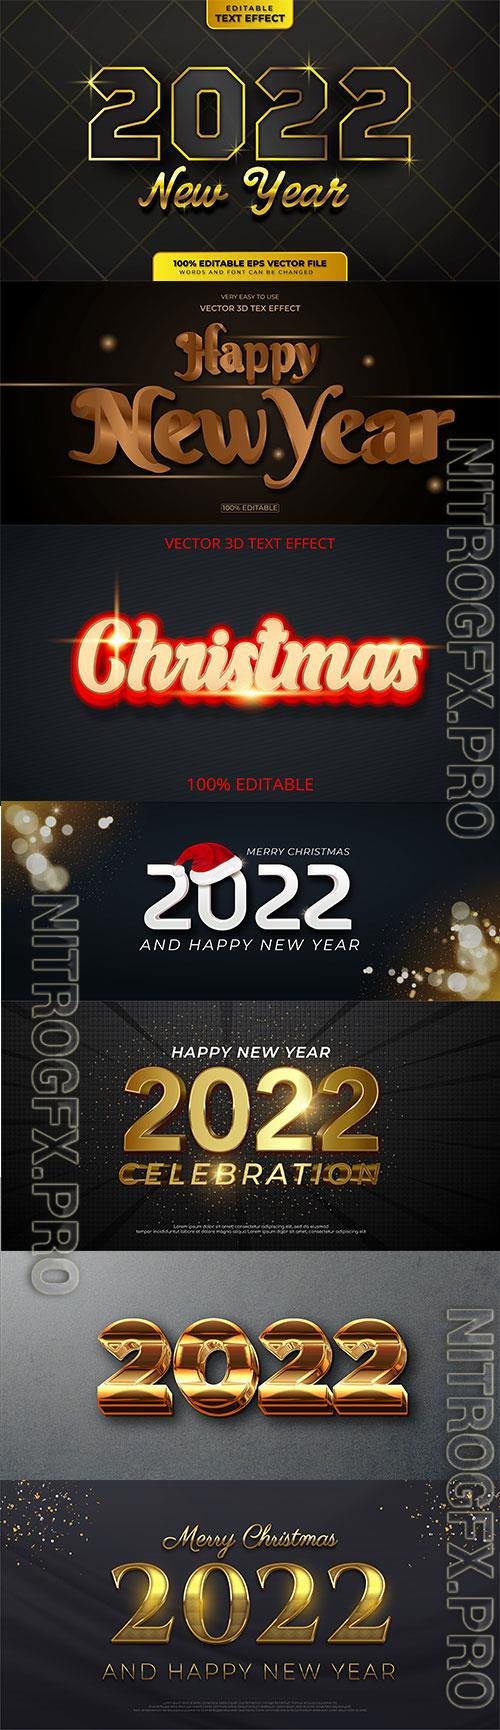 2022 New year and christmas editable text effect vector vol 25